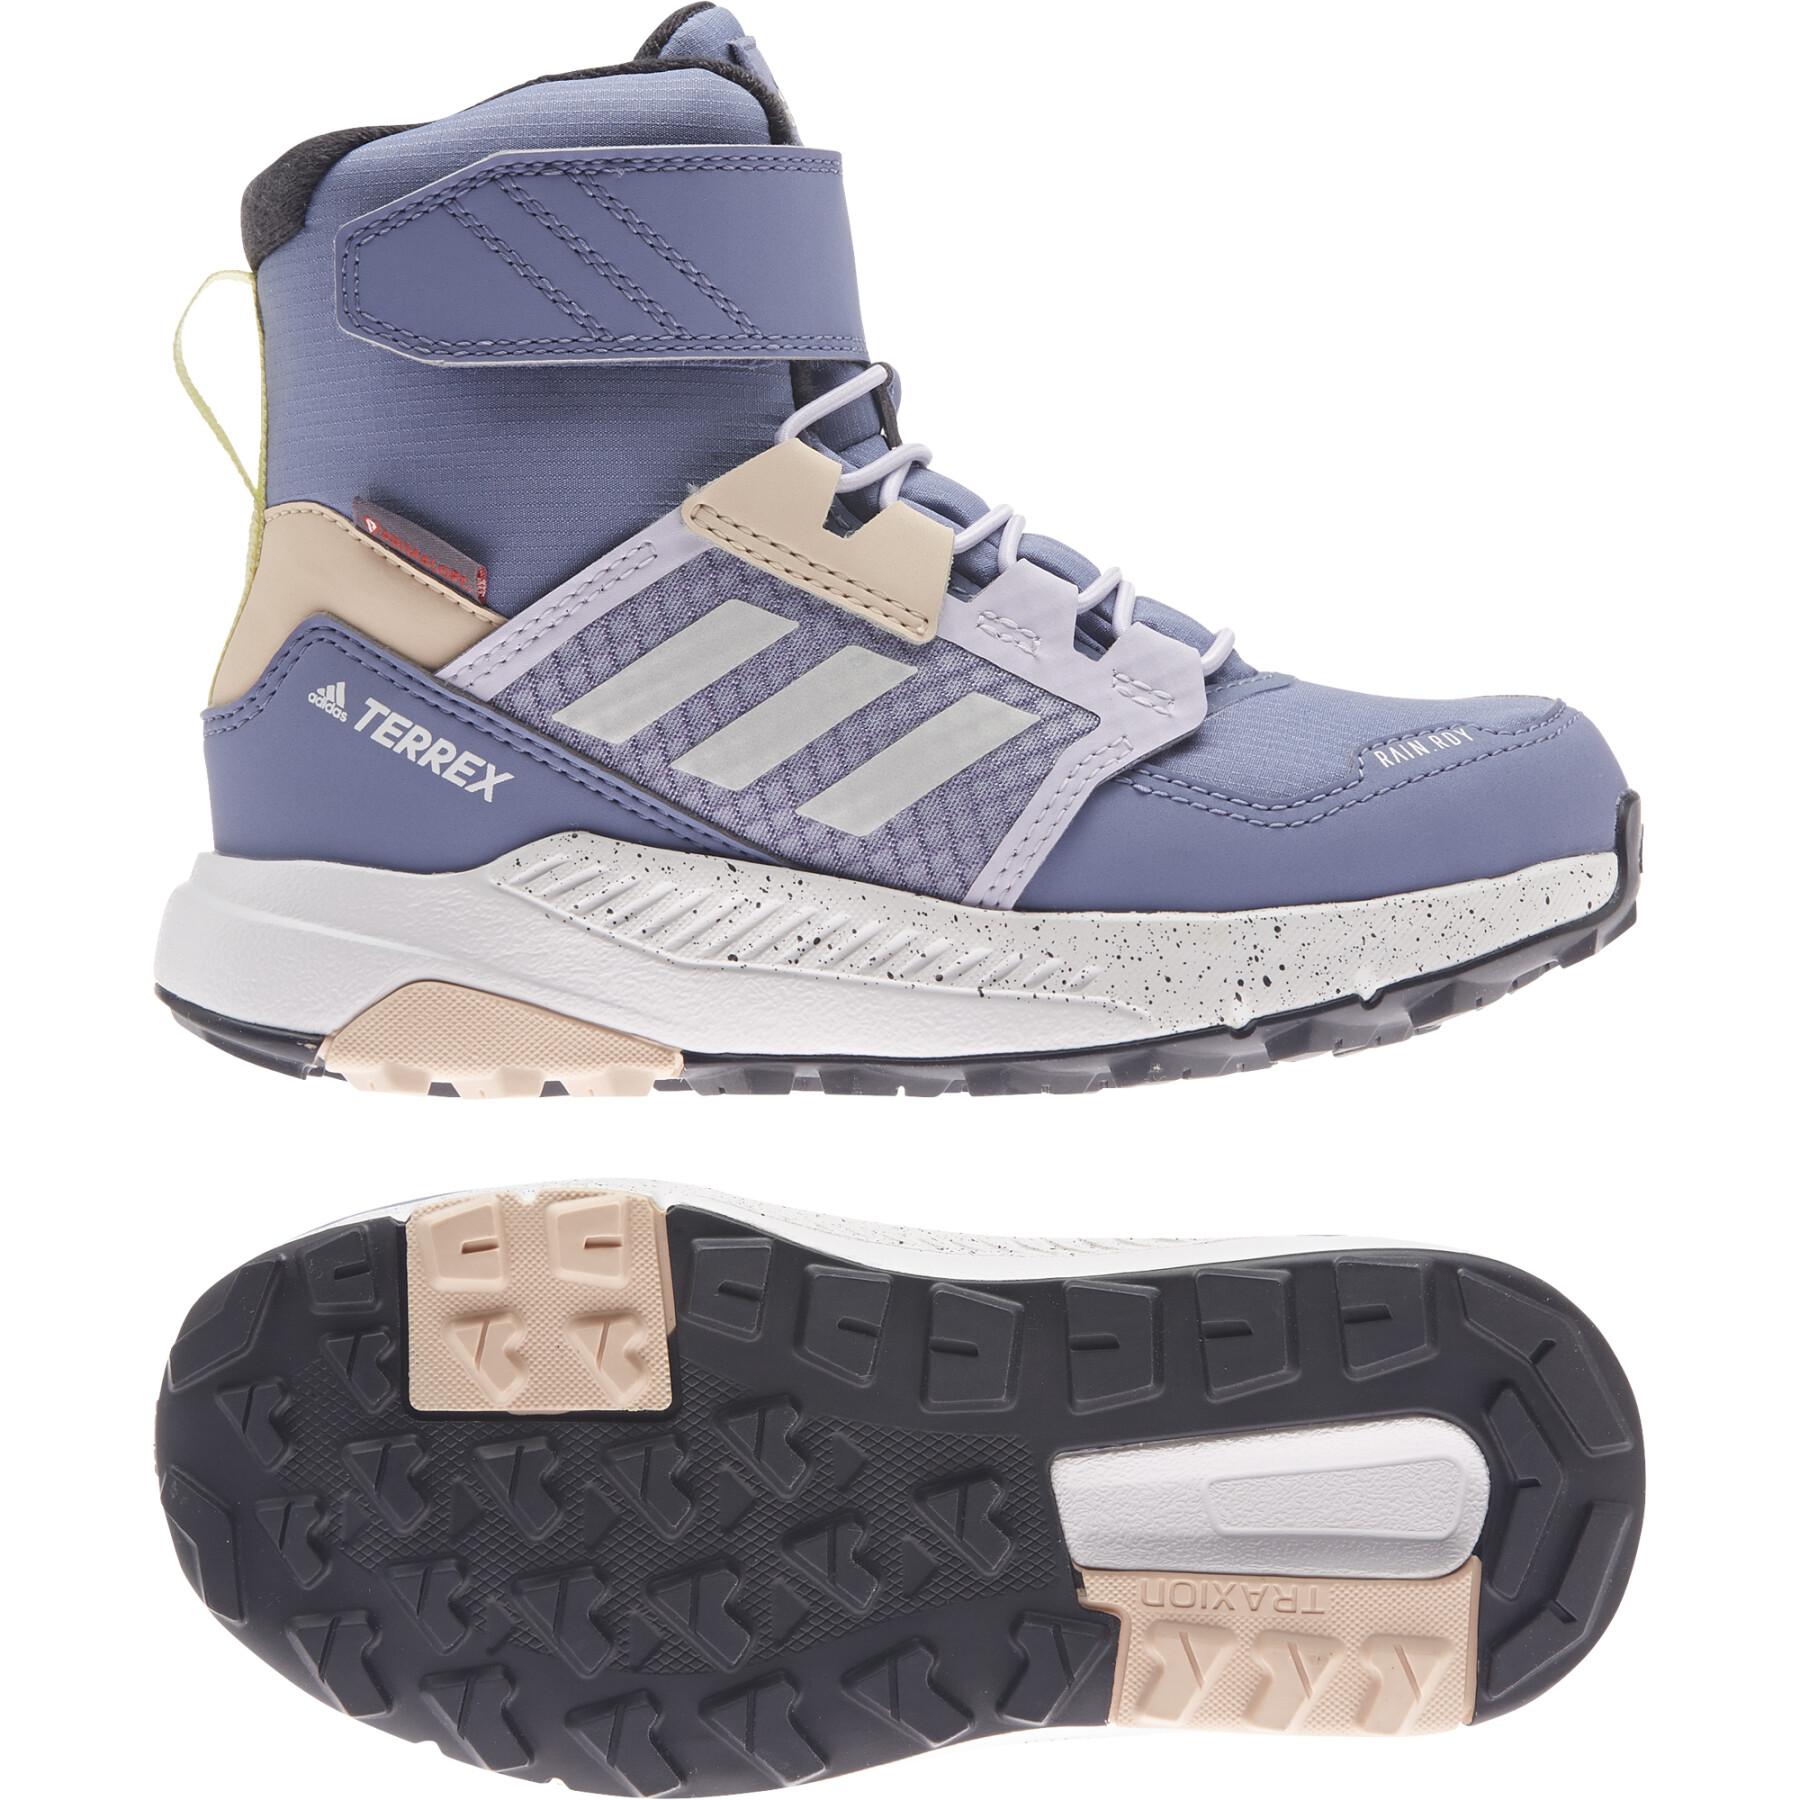 Children's shoes adidas Terrex Trailmaker High COLD.RDY Hiking